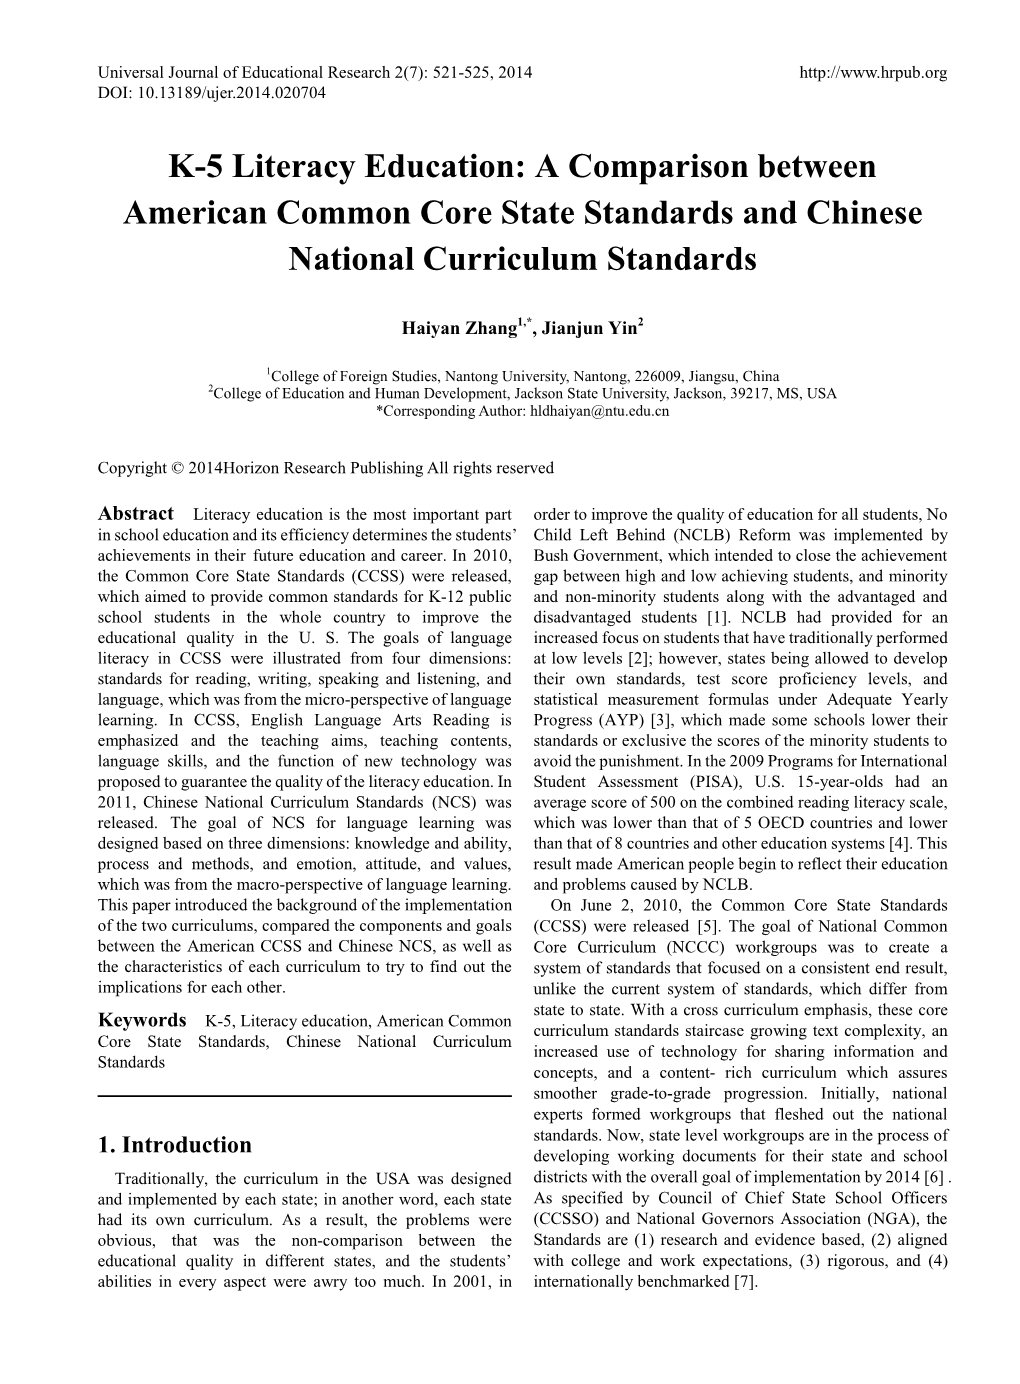 A Comparison Between American Common Core State Standards and Chinese National Curriculum Standards